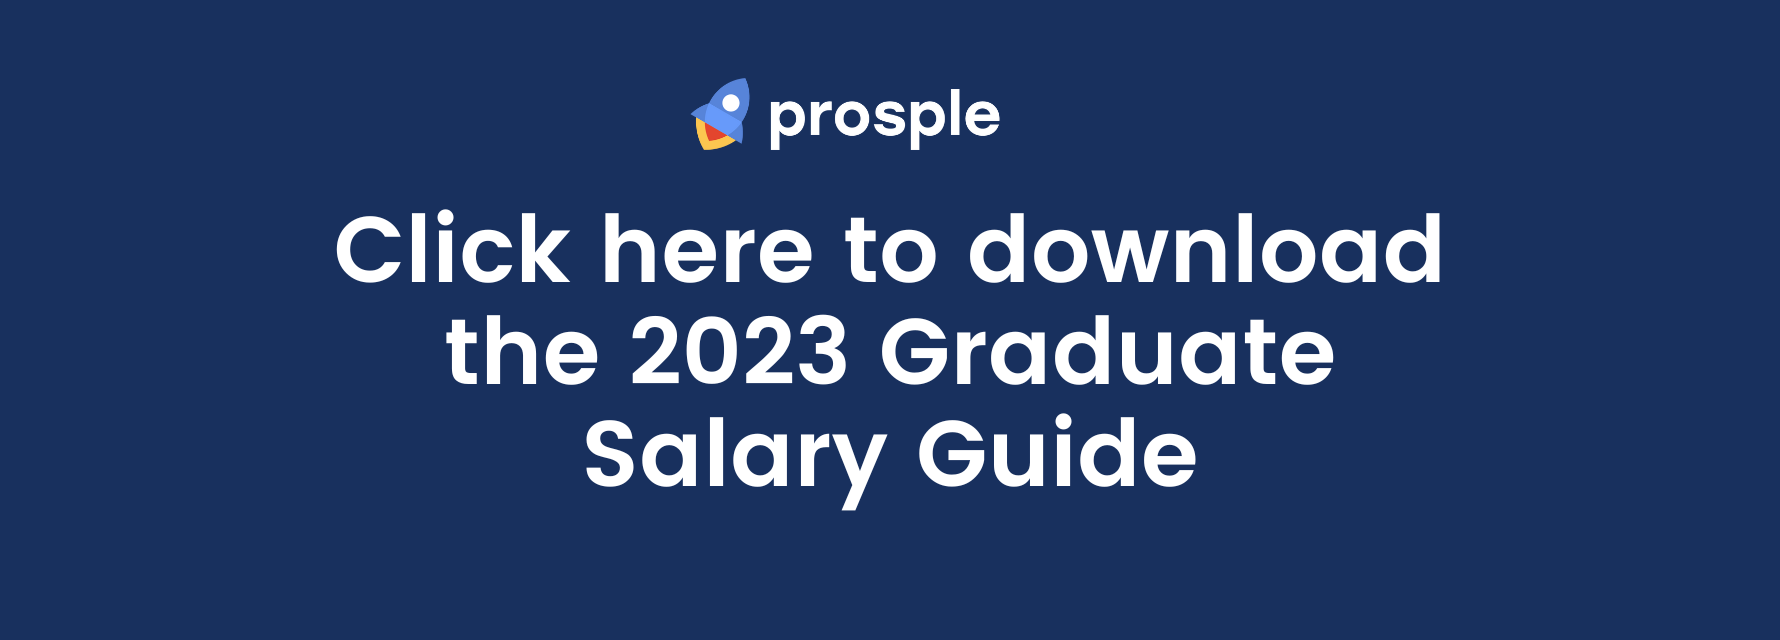 Click here to download the 2023 Prosple Graduate Salary Guide